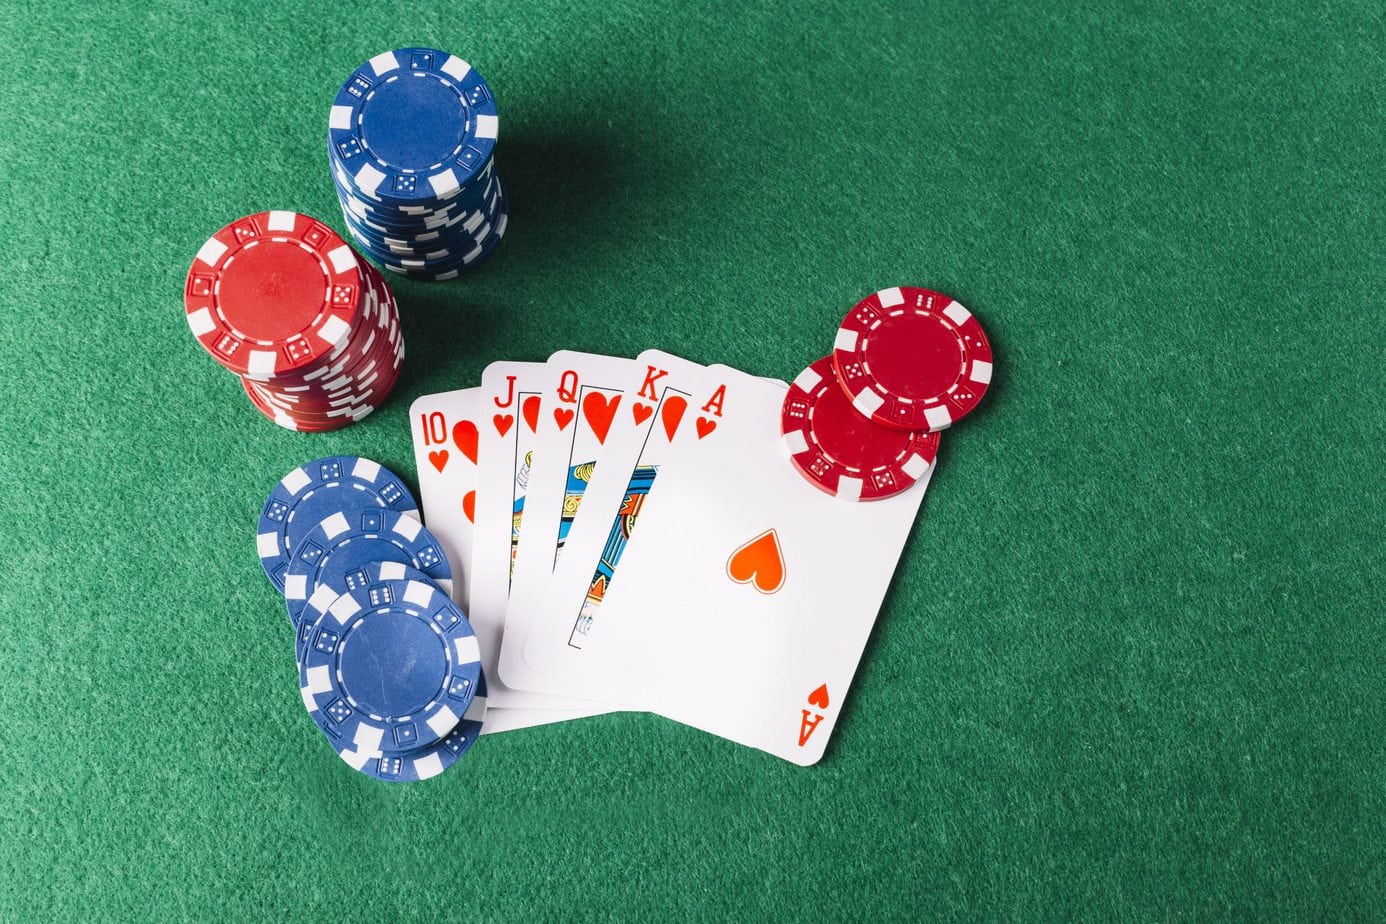 The most popular tournament strategies in poker